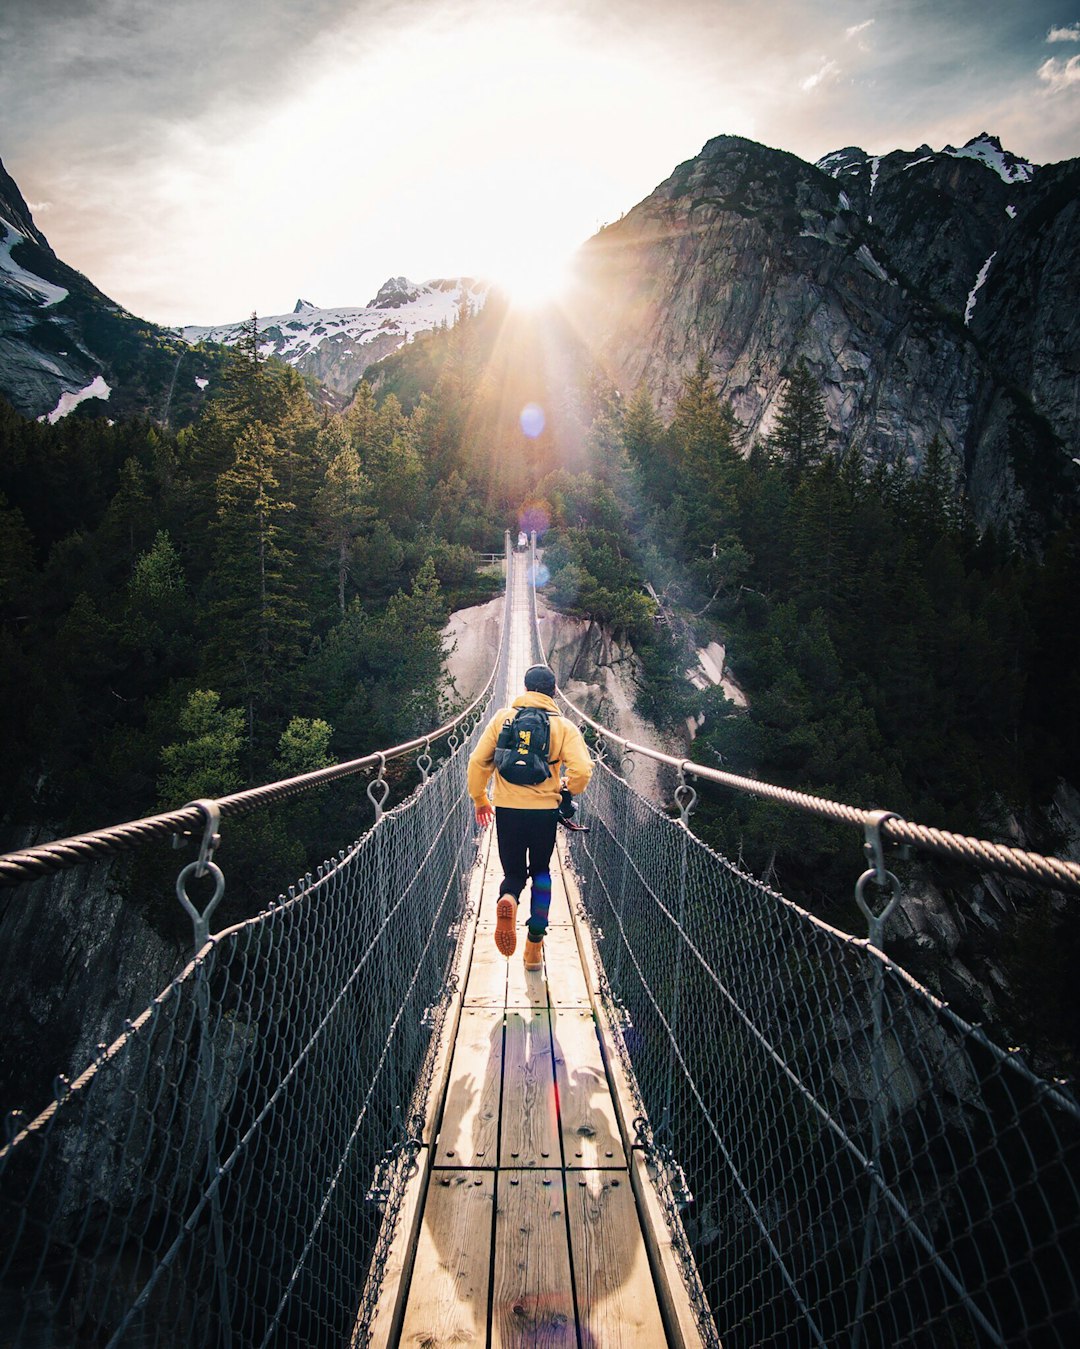 We were at this beautiful brige in murren , in the bernese Oberlan in switzerland with some friend, when i tell my friend to run like if he would catch the last ray.